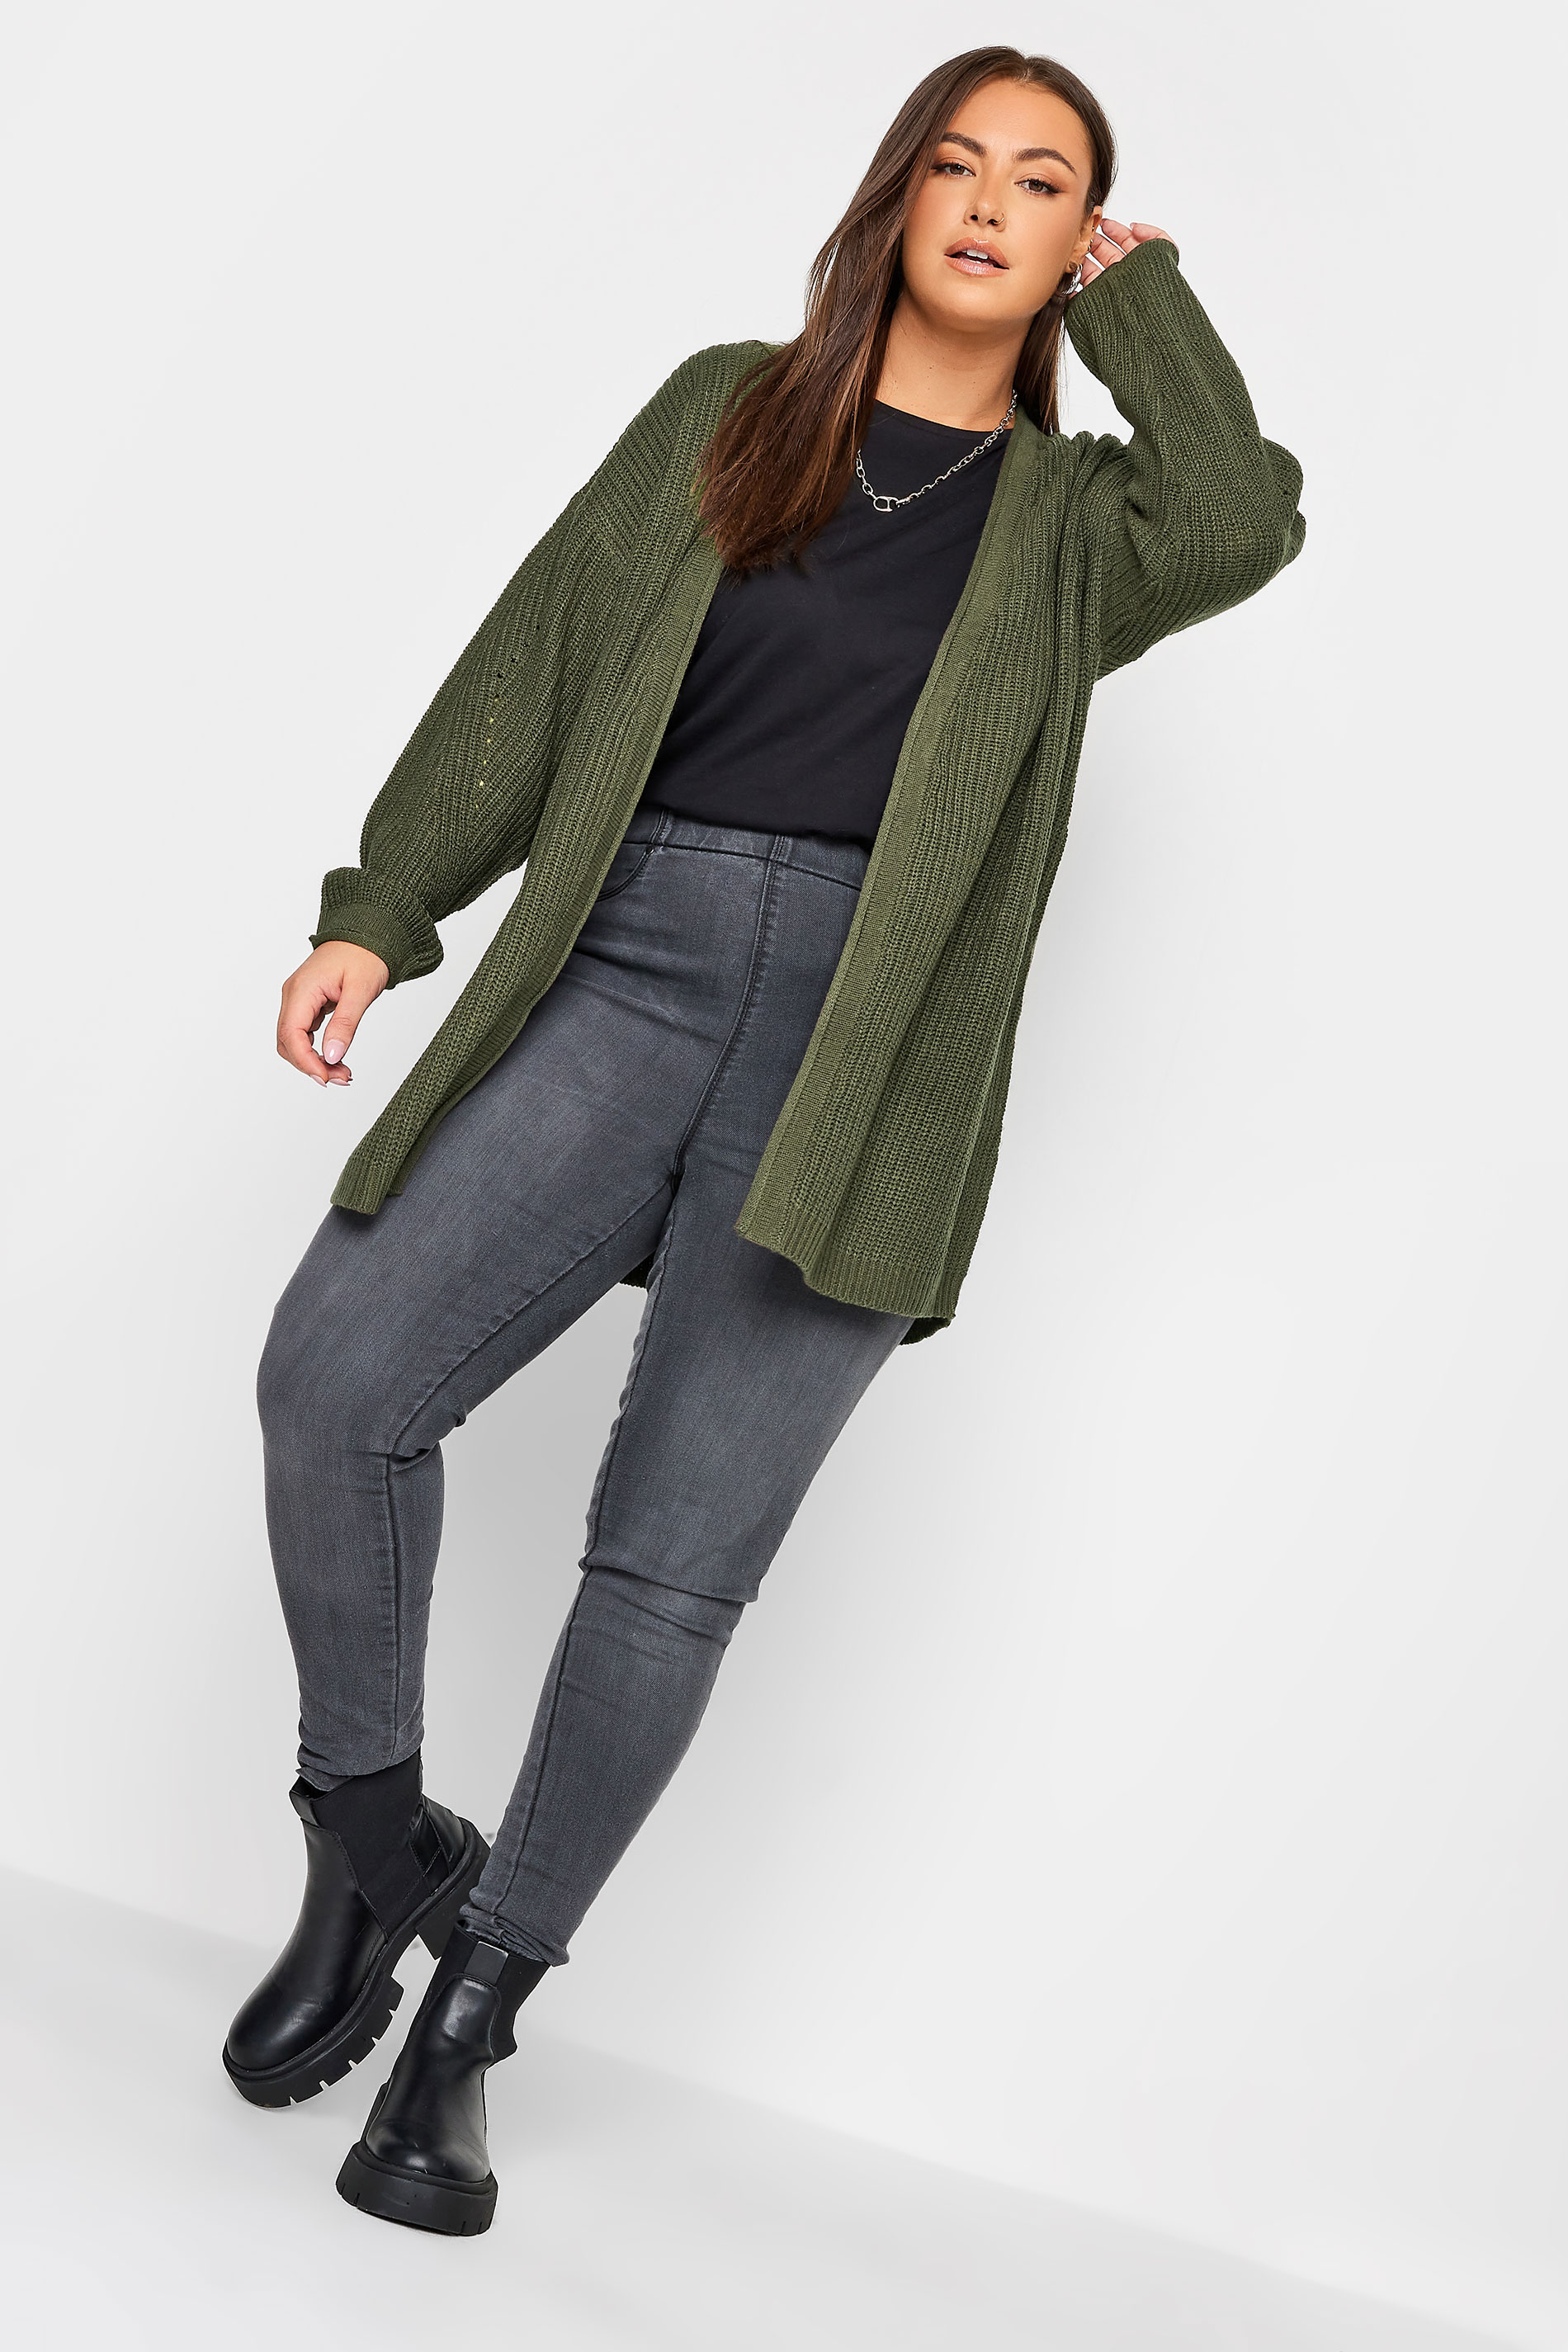 YOURS Plus Size Khaki Green Knitted Cardigan | Yours Clothing 2